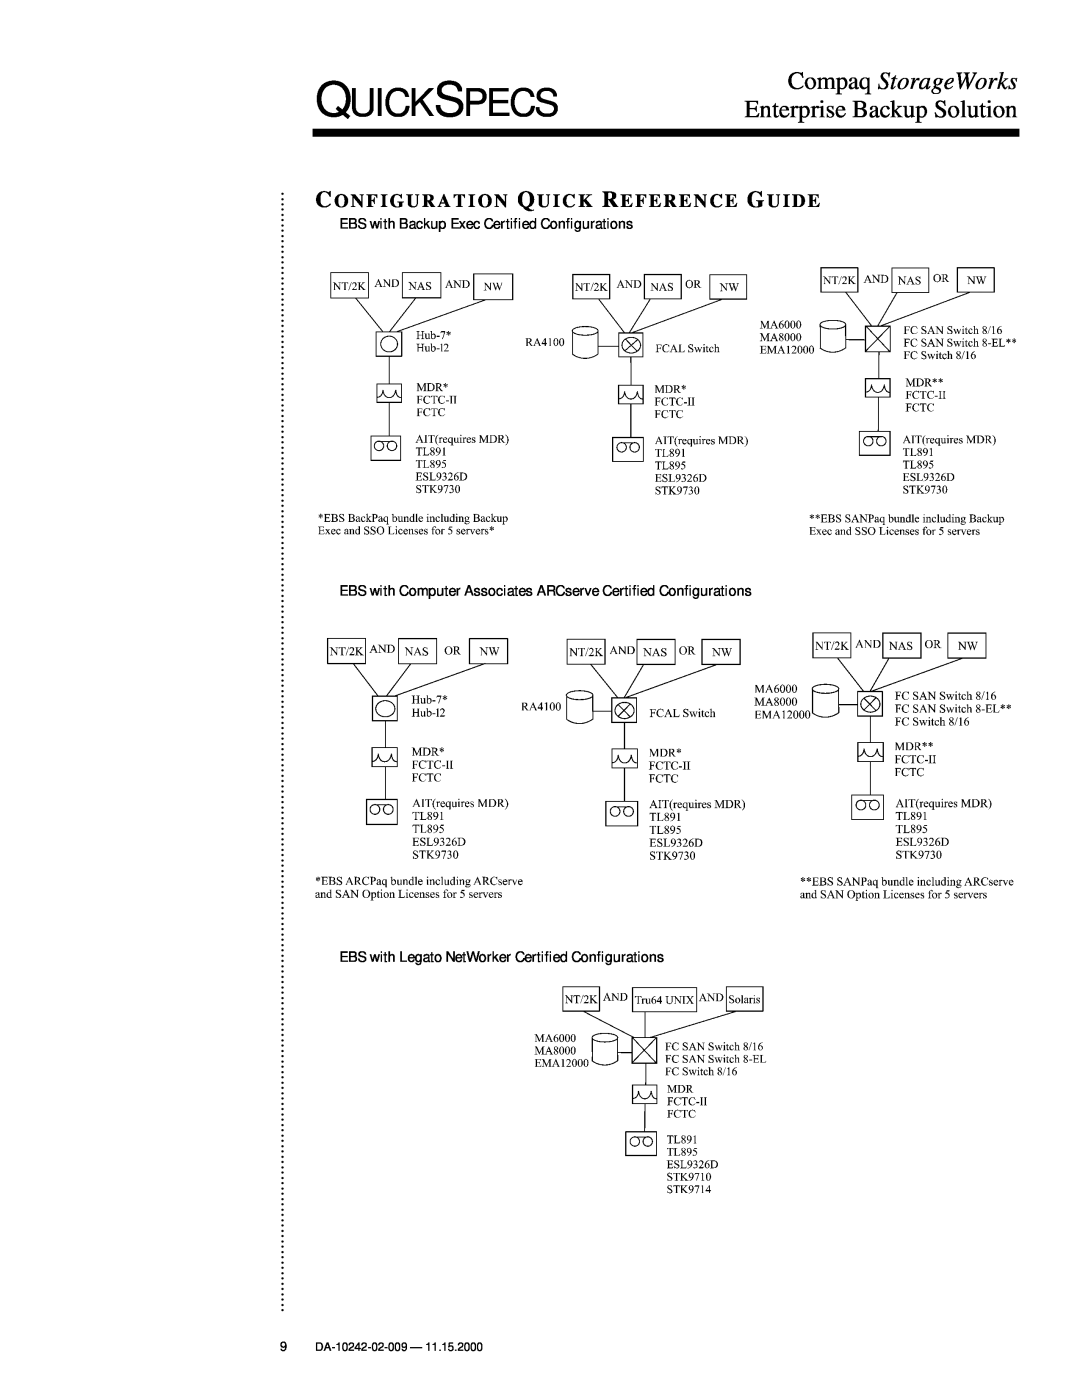 Compaq TL895, DA-10242 manual Configuration Quick Reference Guide, EBS with Backup Exec Certified Configurations, Quickspecs 